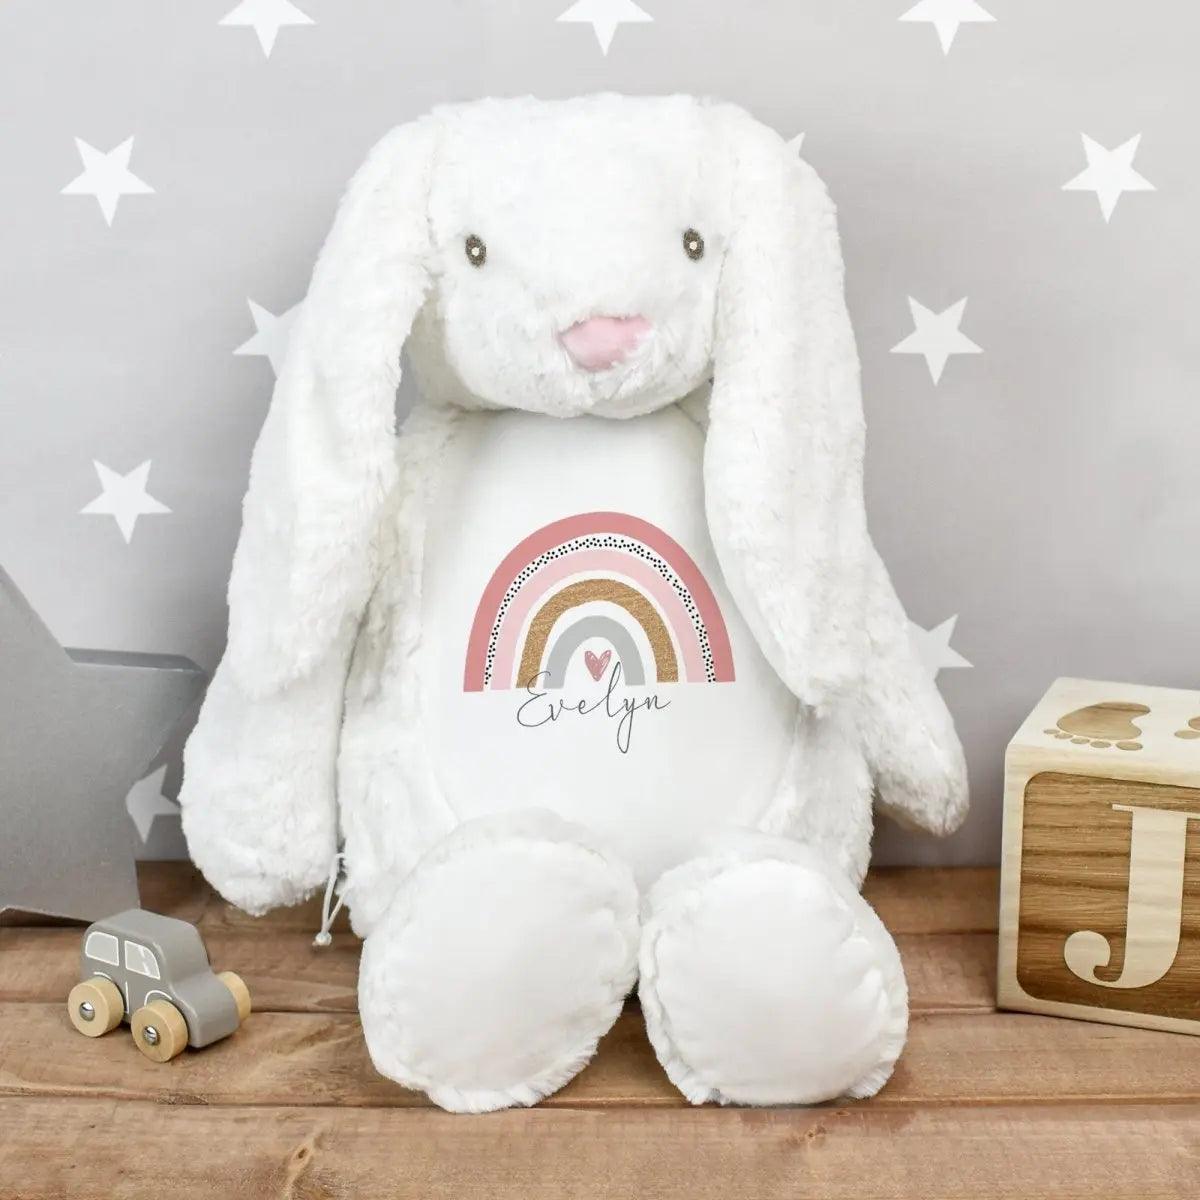 Personalised White Bunny Rabbit, Large Soft Toy, New Baby Gift, Rainbow Nursery Decor, Bunny Teddy, Baby Girl Gift, Baby Shower, Easter Baby - Amy Lucy